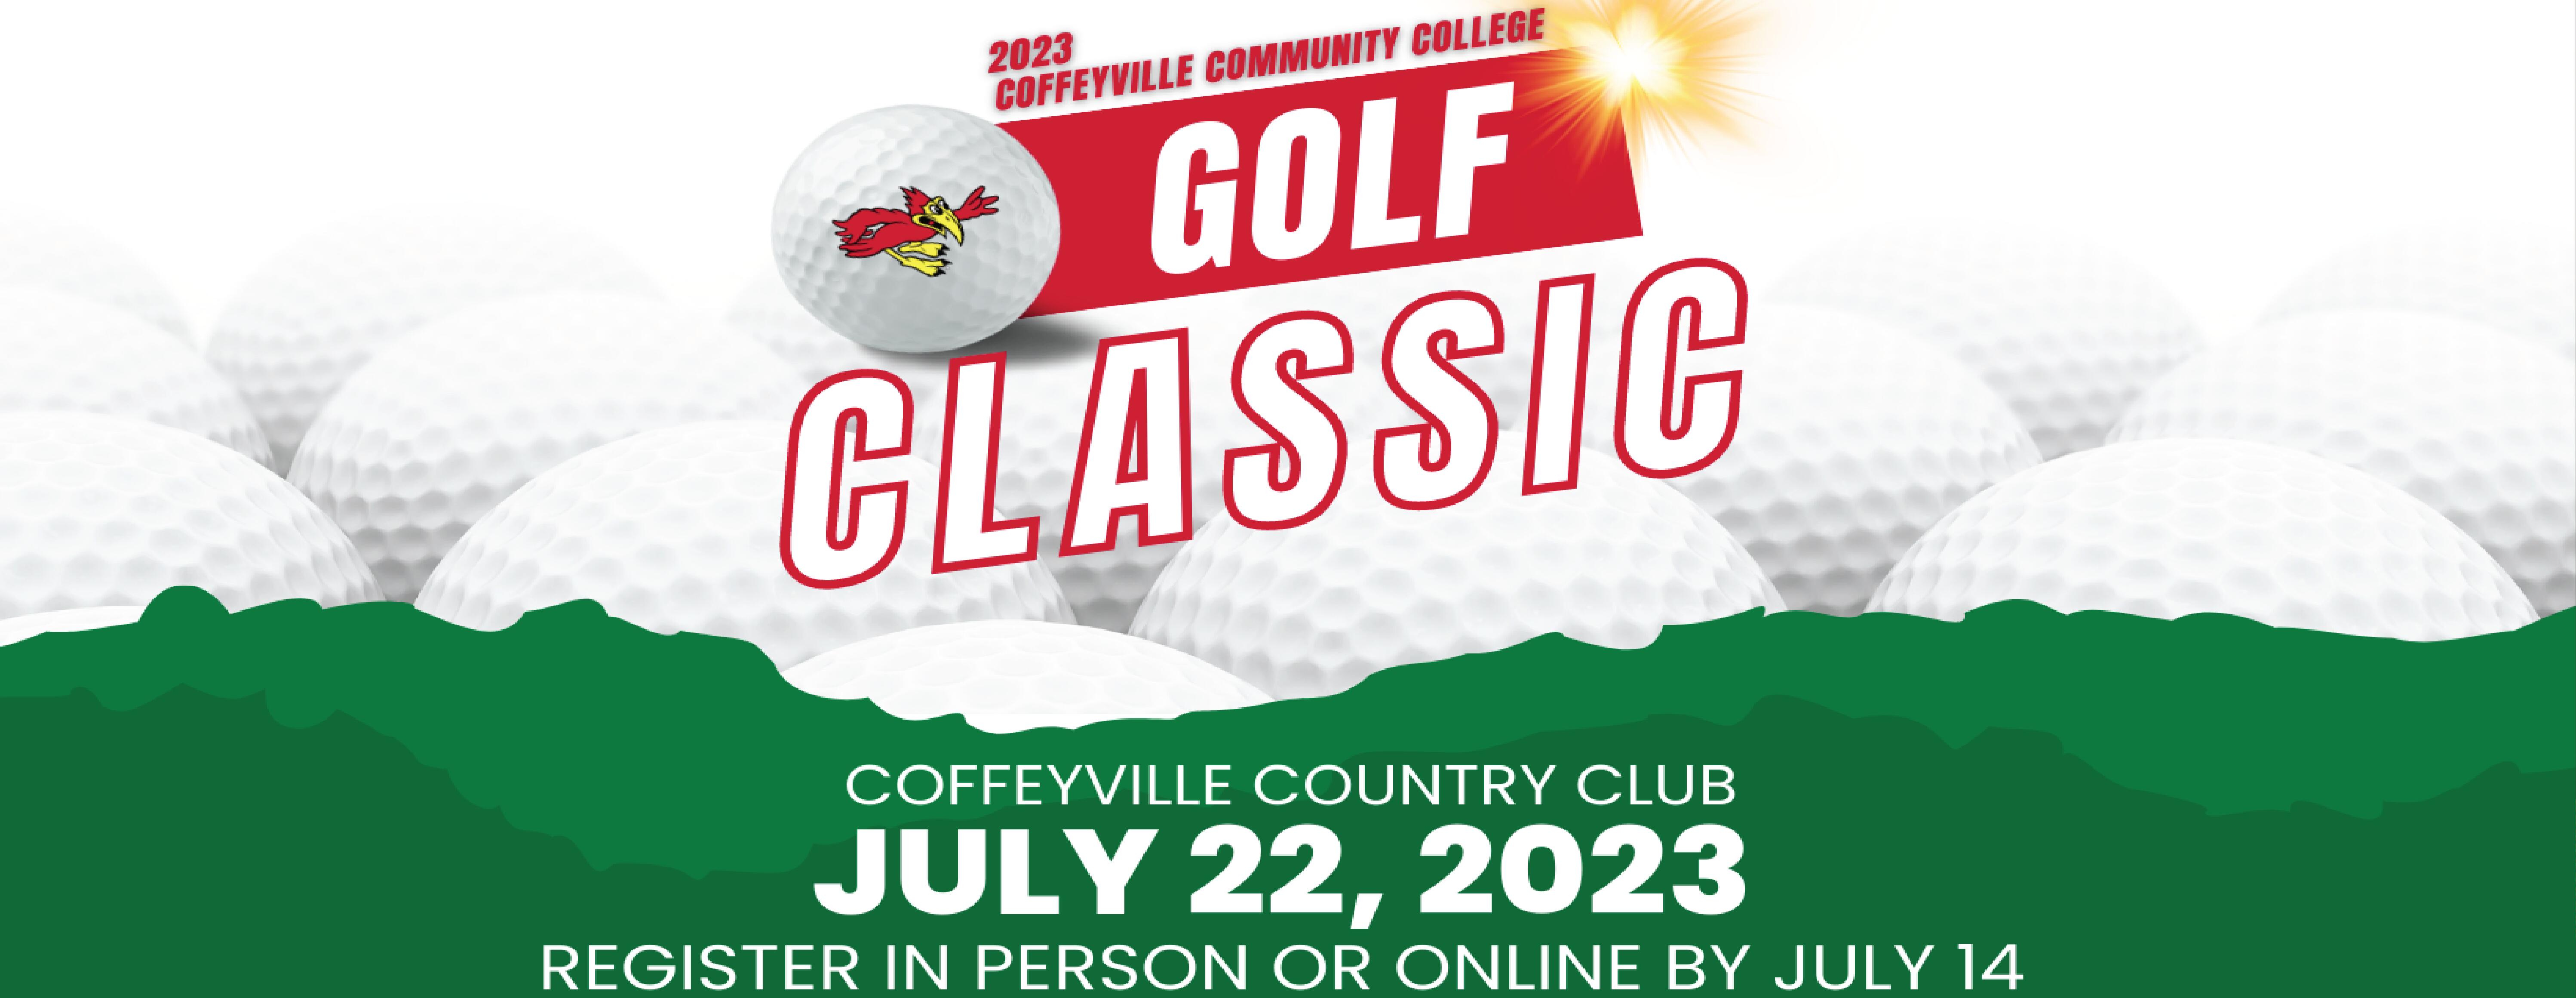 2023 CCC Golf Classic Learn More